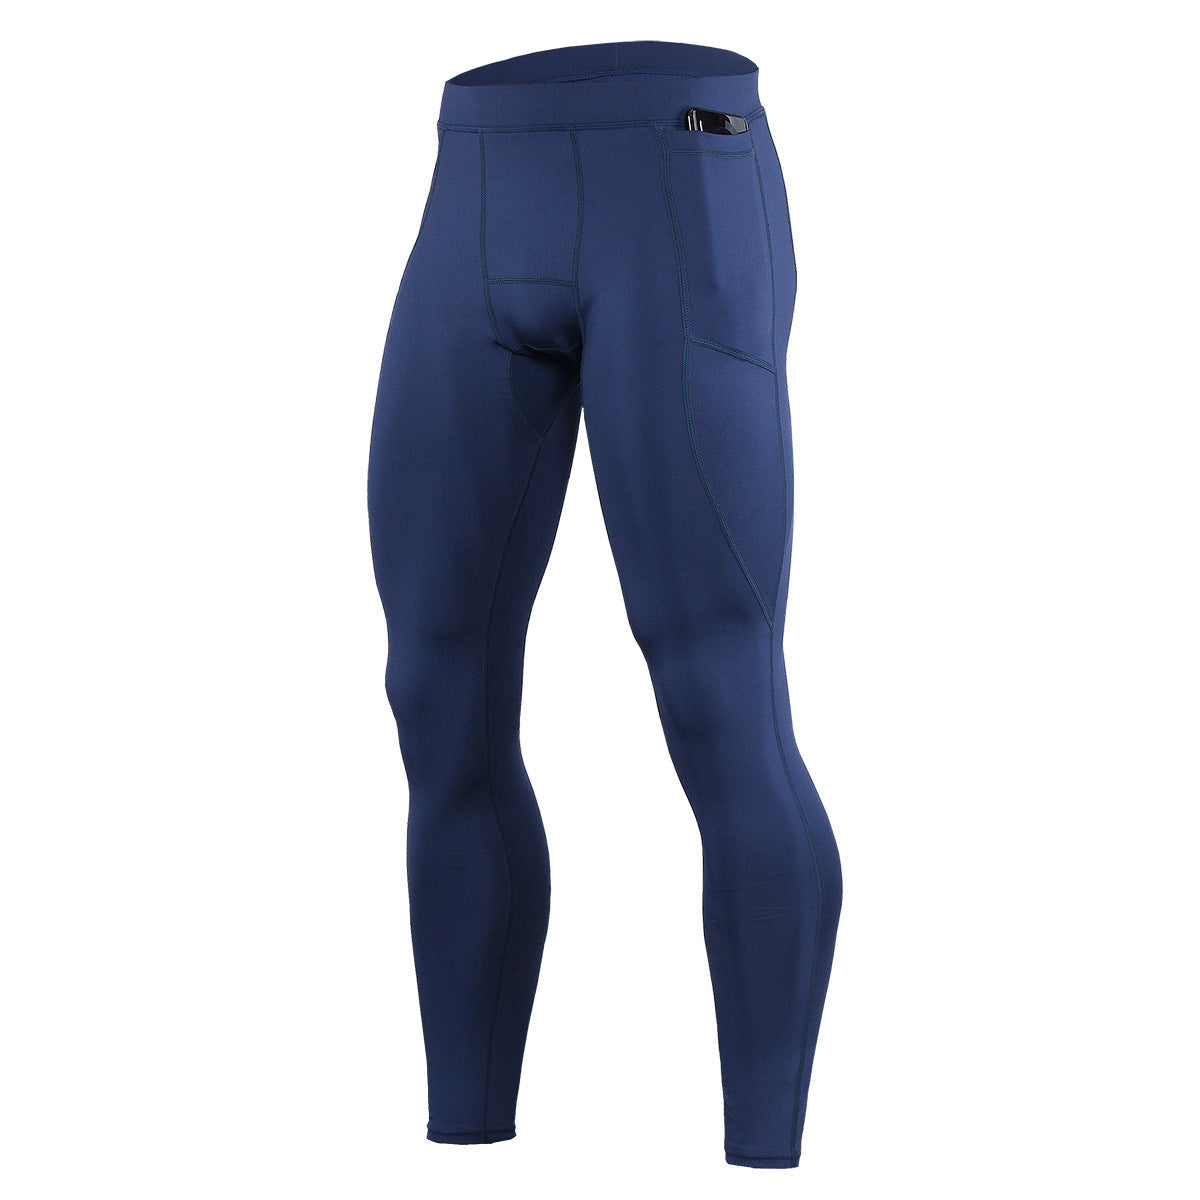 Men's Running Sports Tight-Fitness Pants for Active Workouts